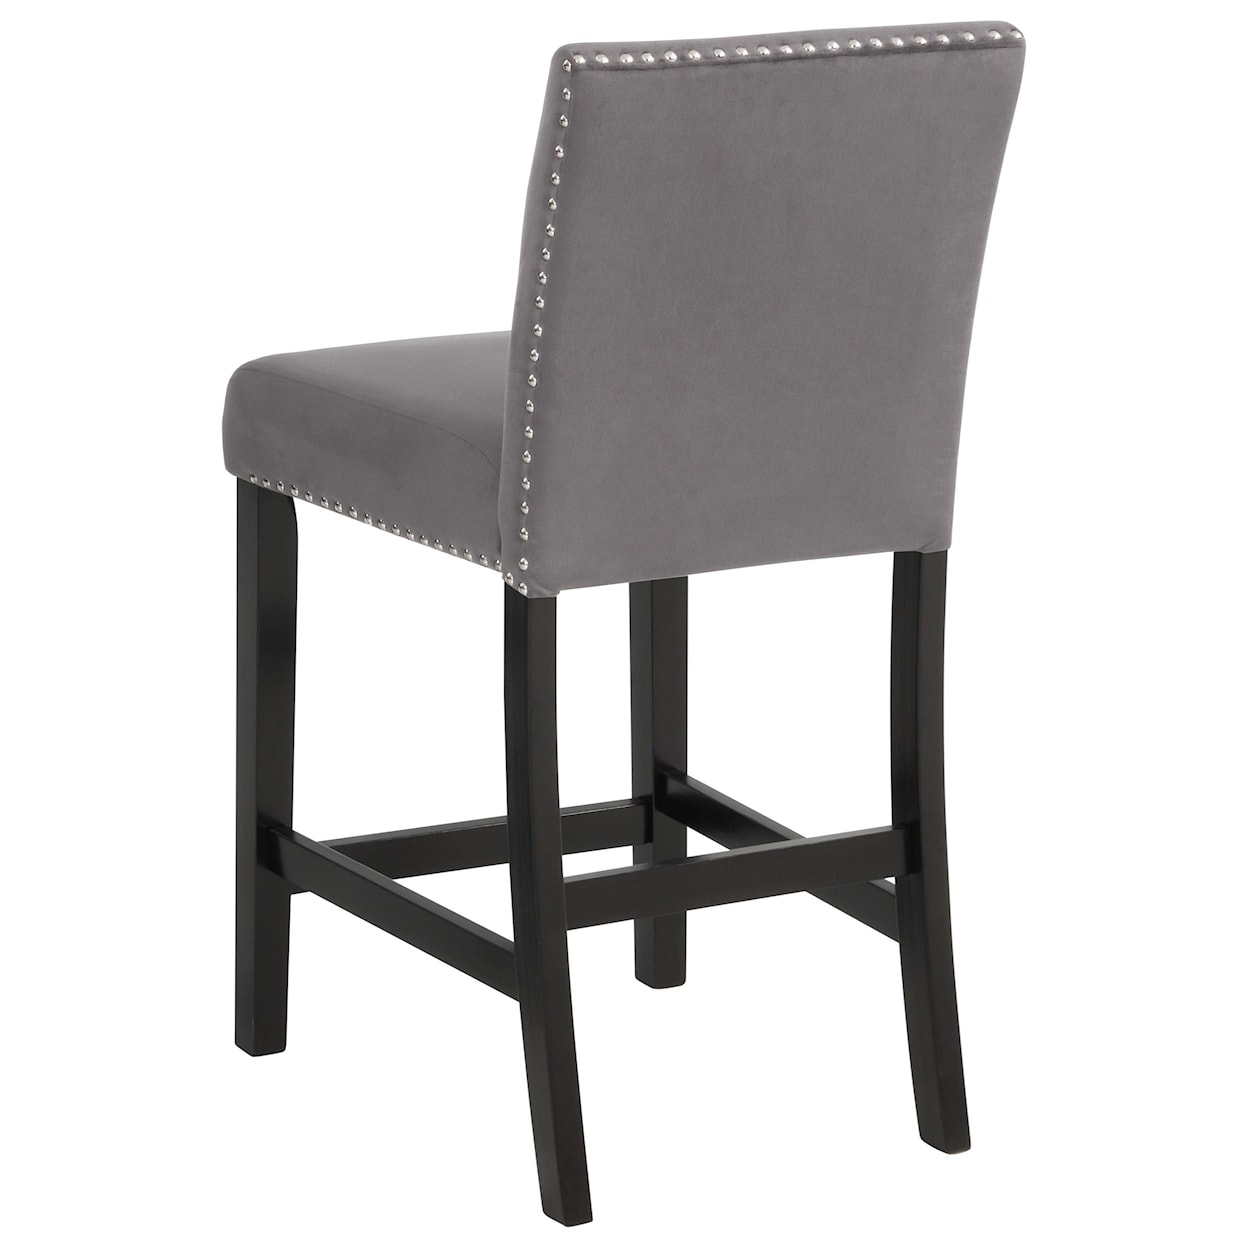 New Classic Celeste Counter Chair